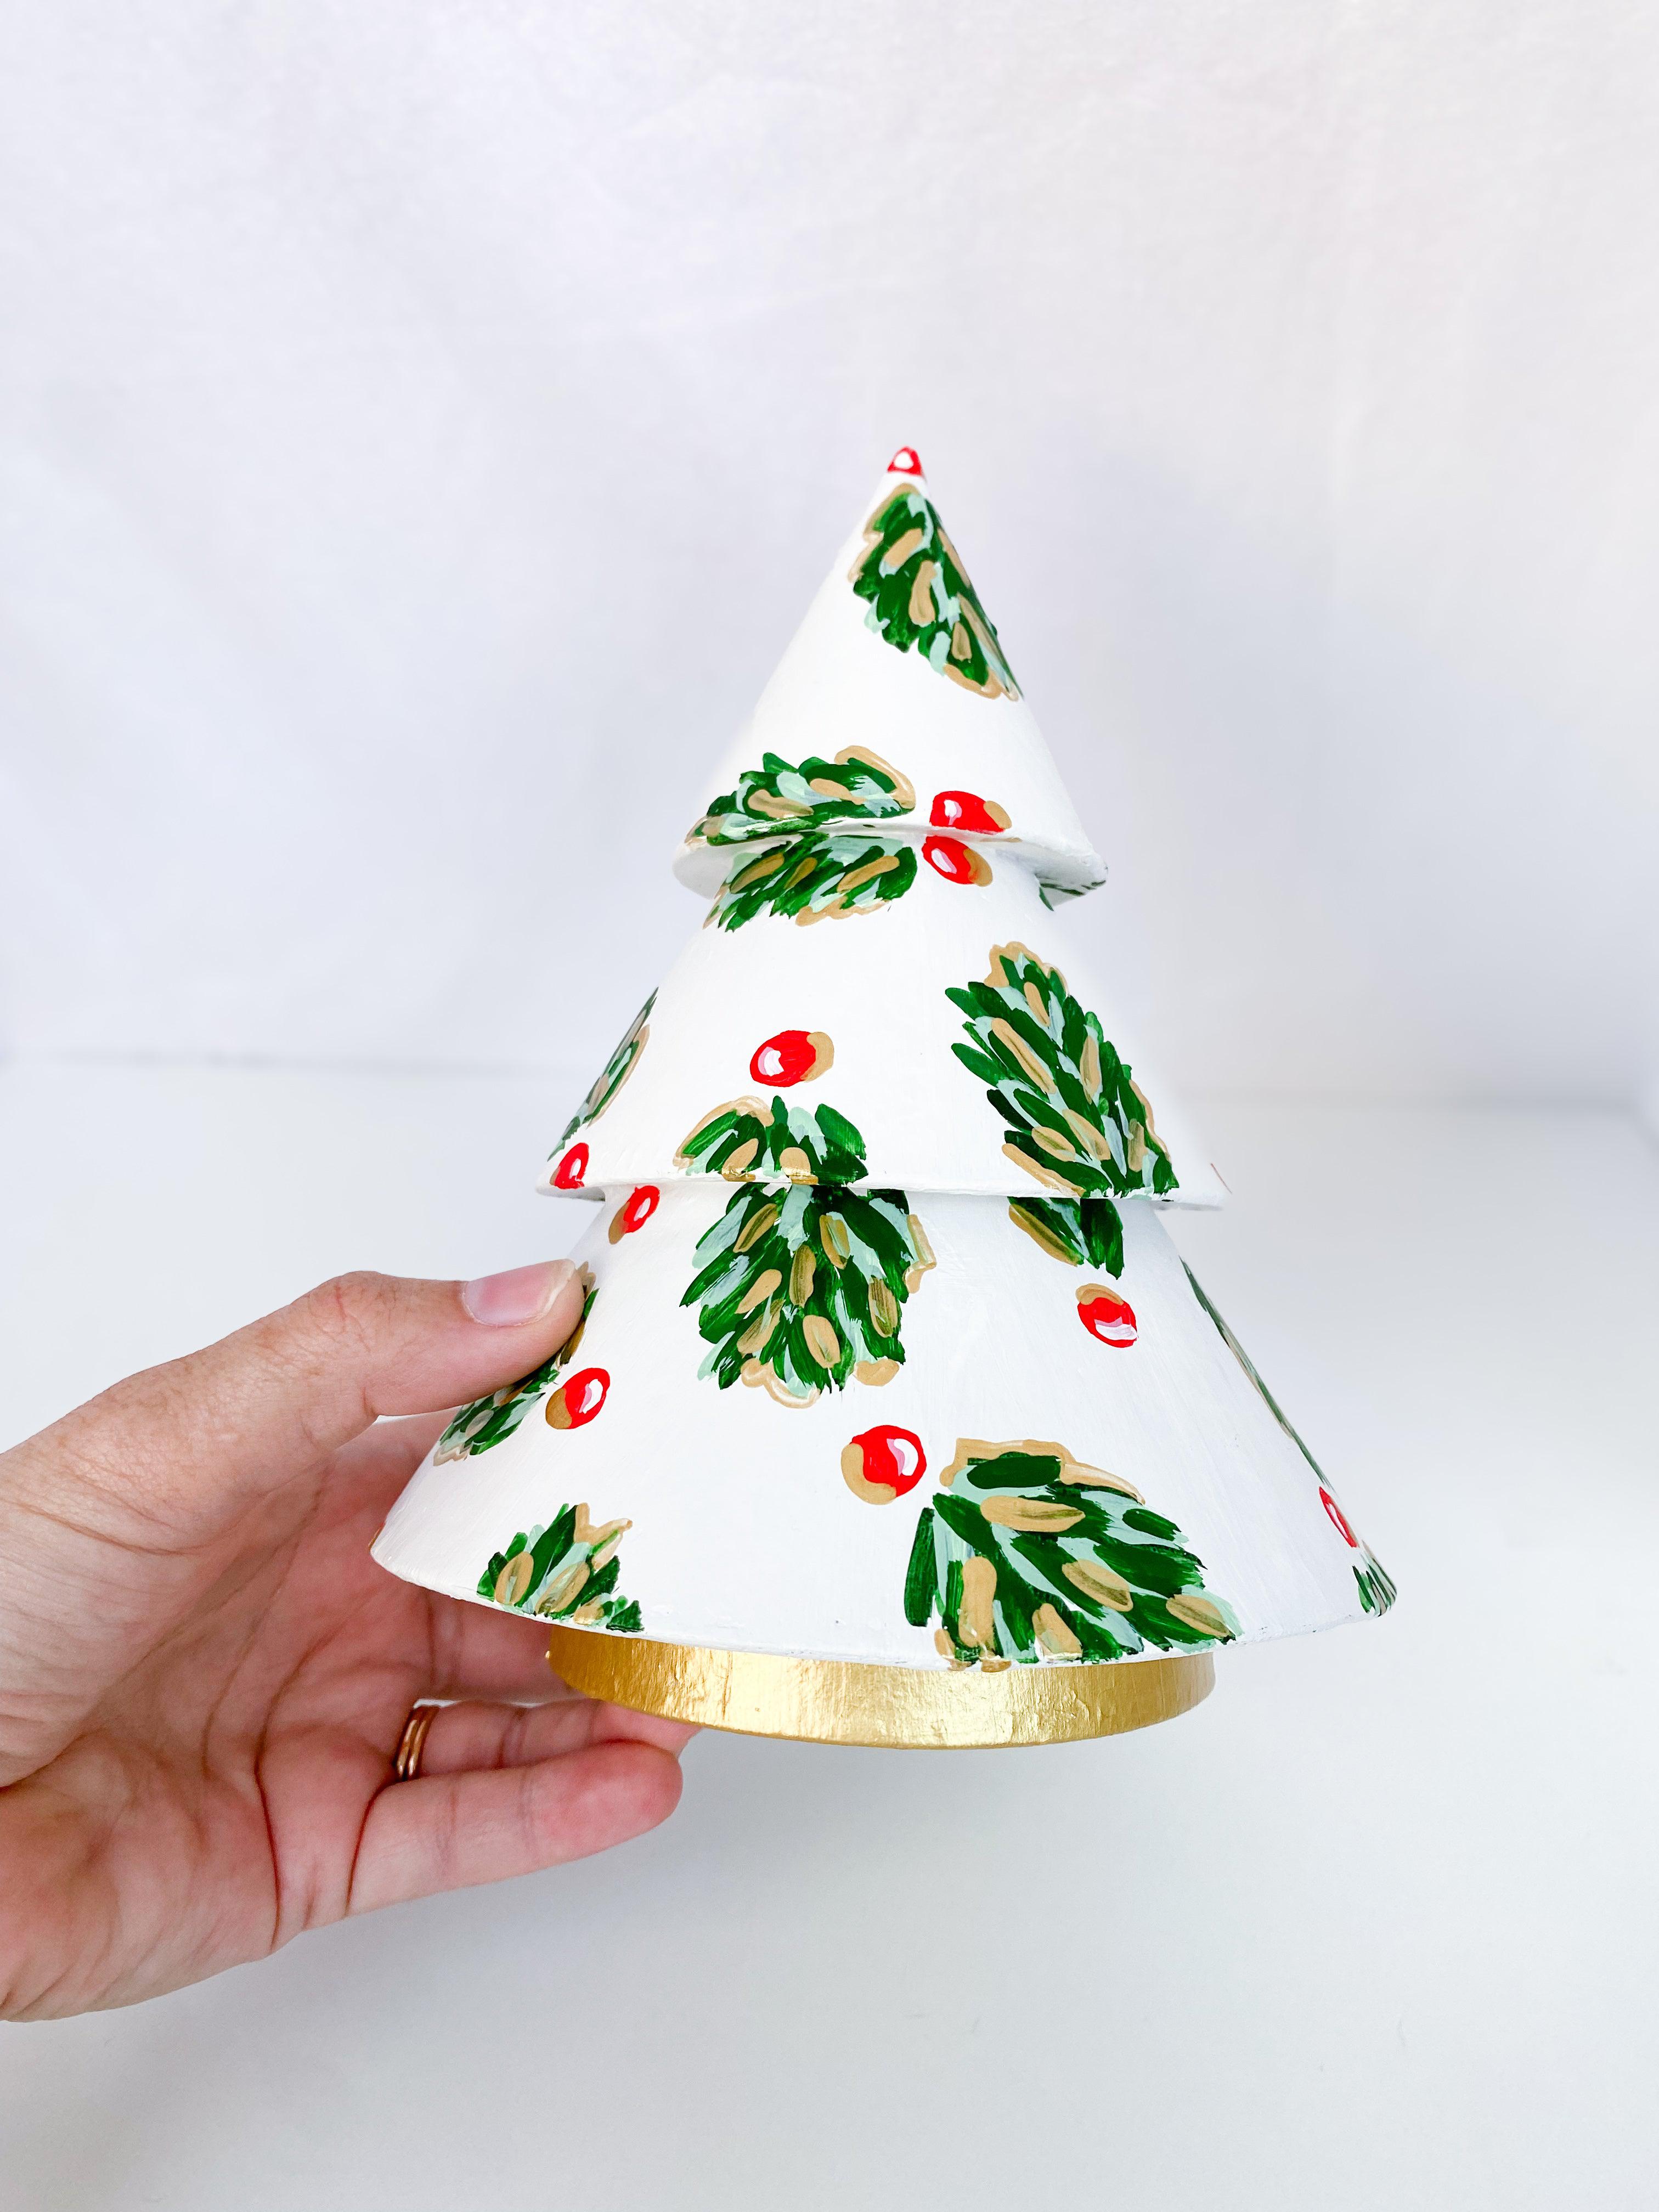 Winter Pearl Golden Holly Mini Tree - Short-Hand-Painted Mini Christmas Tree | Measures 7.5" tall and approx. 5.5" wide | Features the Golden Holly design with an ivory base and shimmery gold accents and gold trunk | Light-weight and non-breakable paper mache tree | Coated with a protective matte finish that will keep it shimmering year after year | Each tree is slightly different with potential small imperfections due to the hand-painted nature, making each one special and unique!-The Singing Little Bird